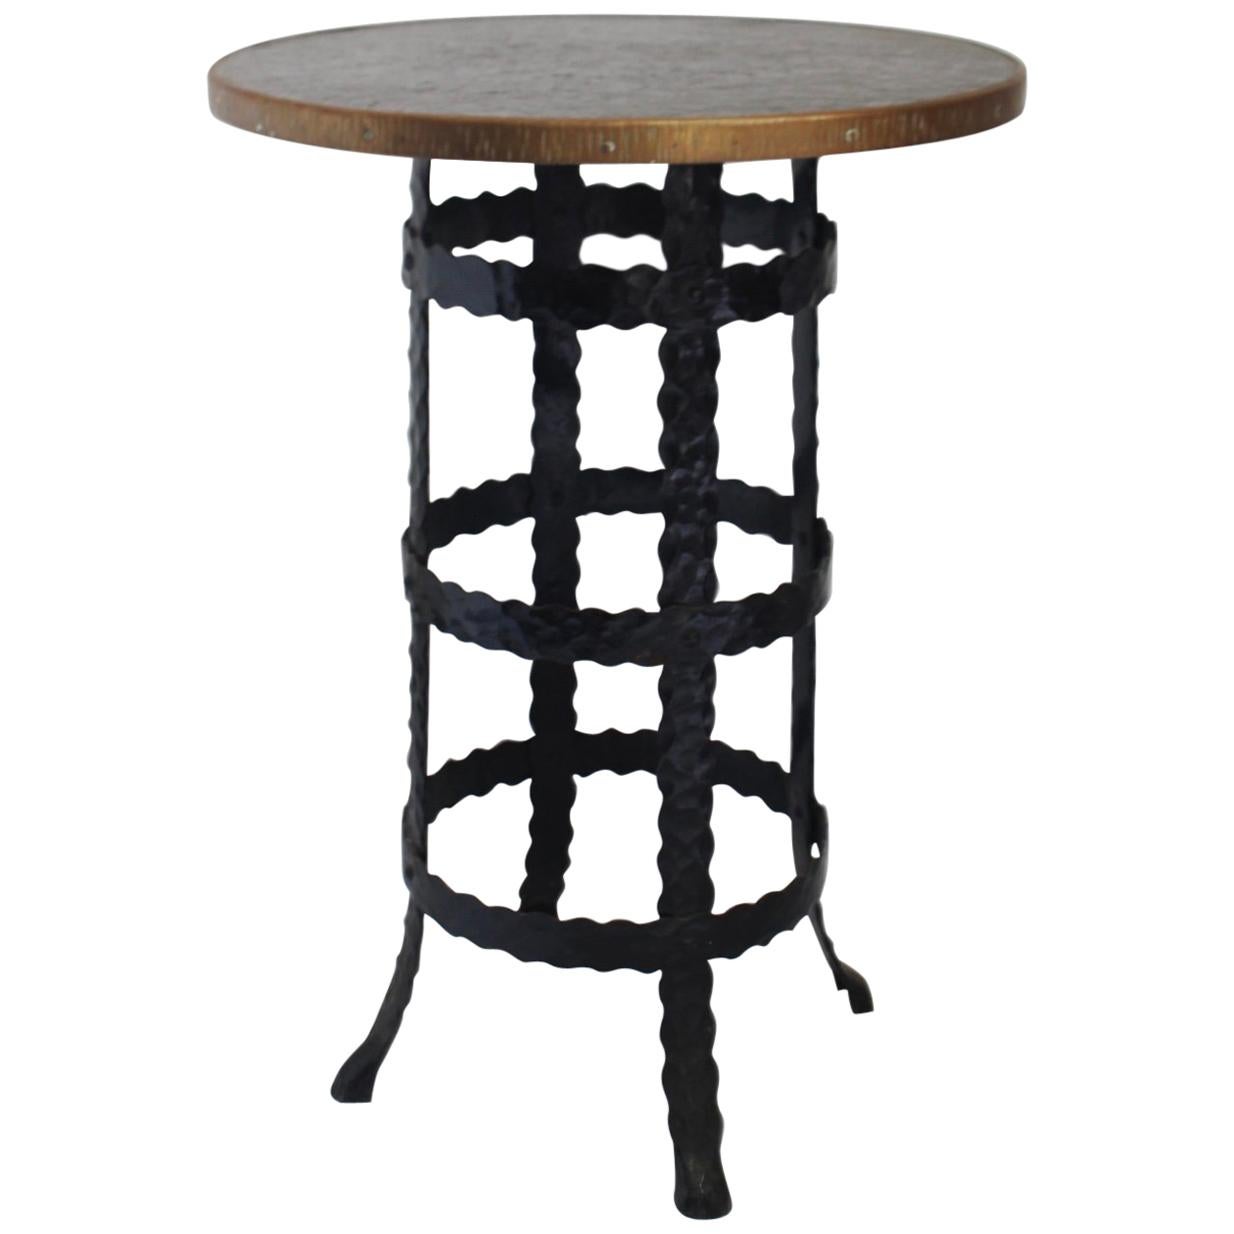 Midcentury Wrought Iron and Wood Round Coffee or Side High Table, 1950s For Sale